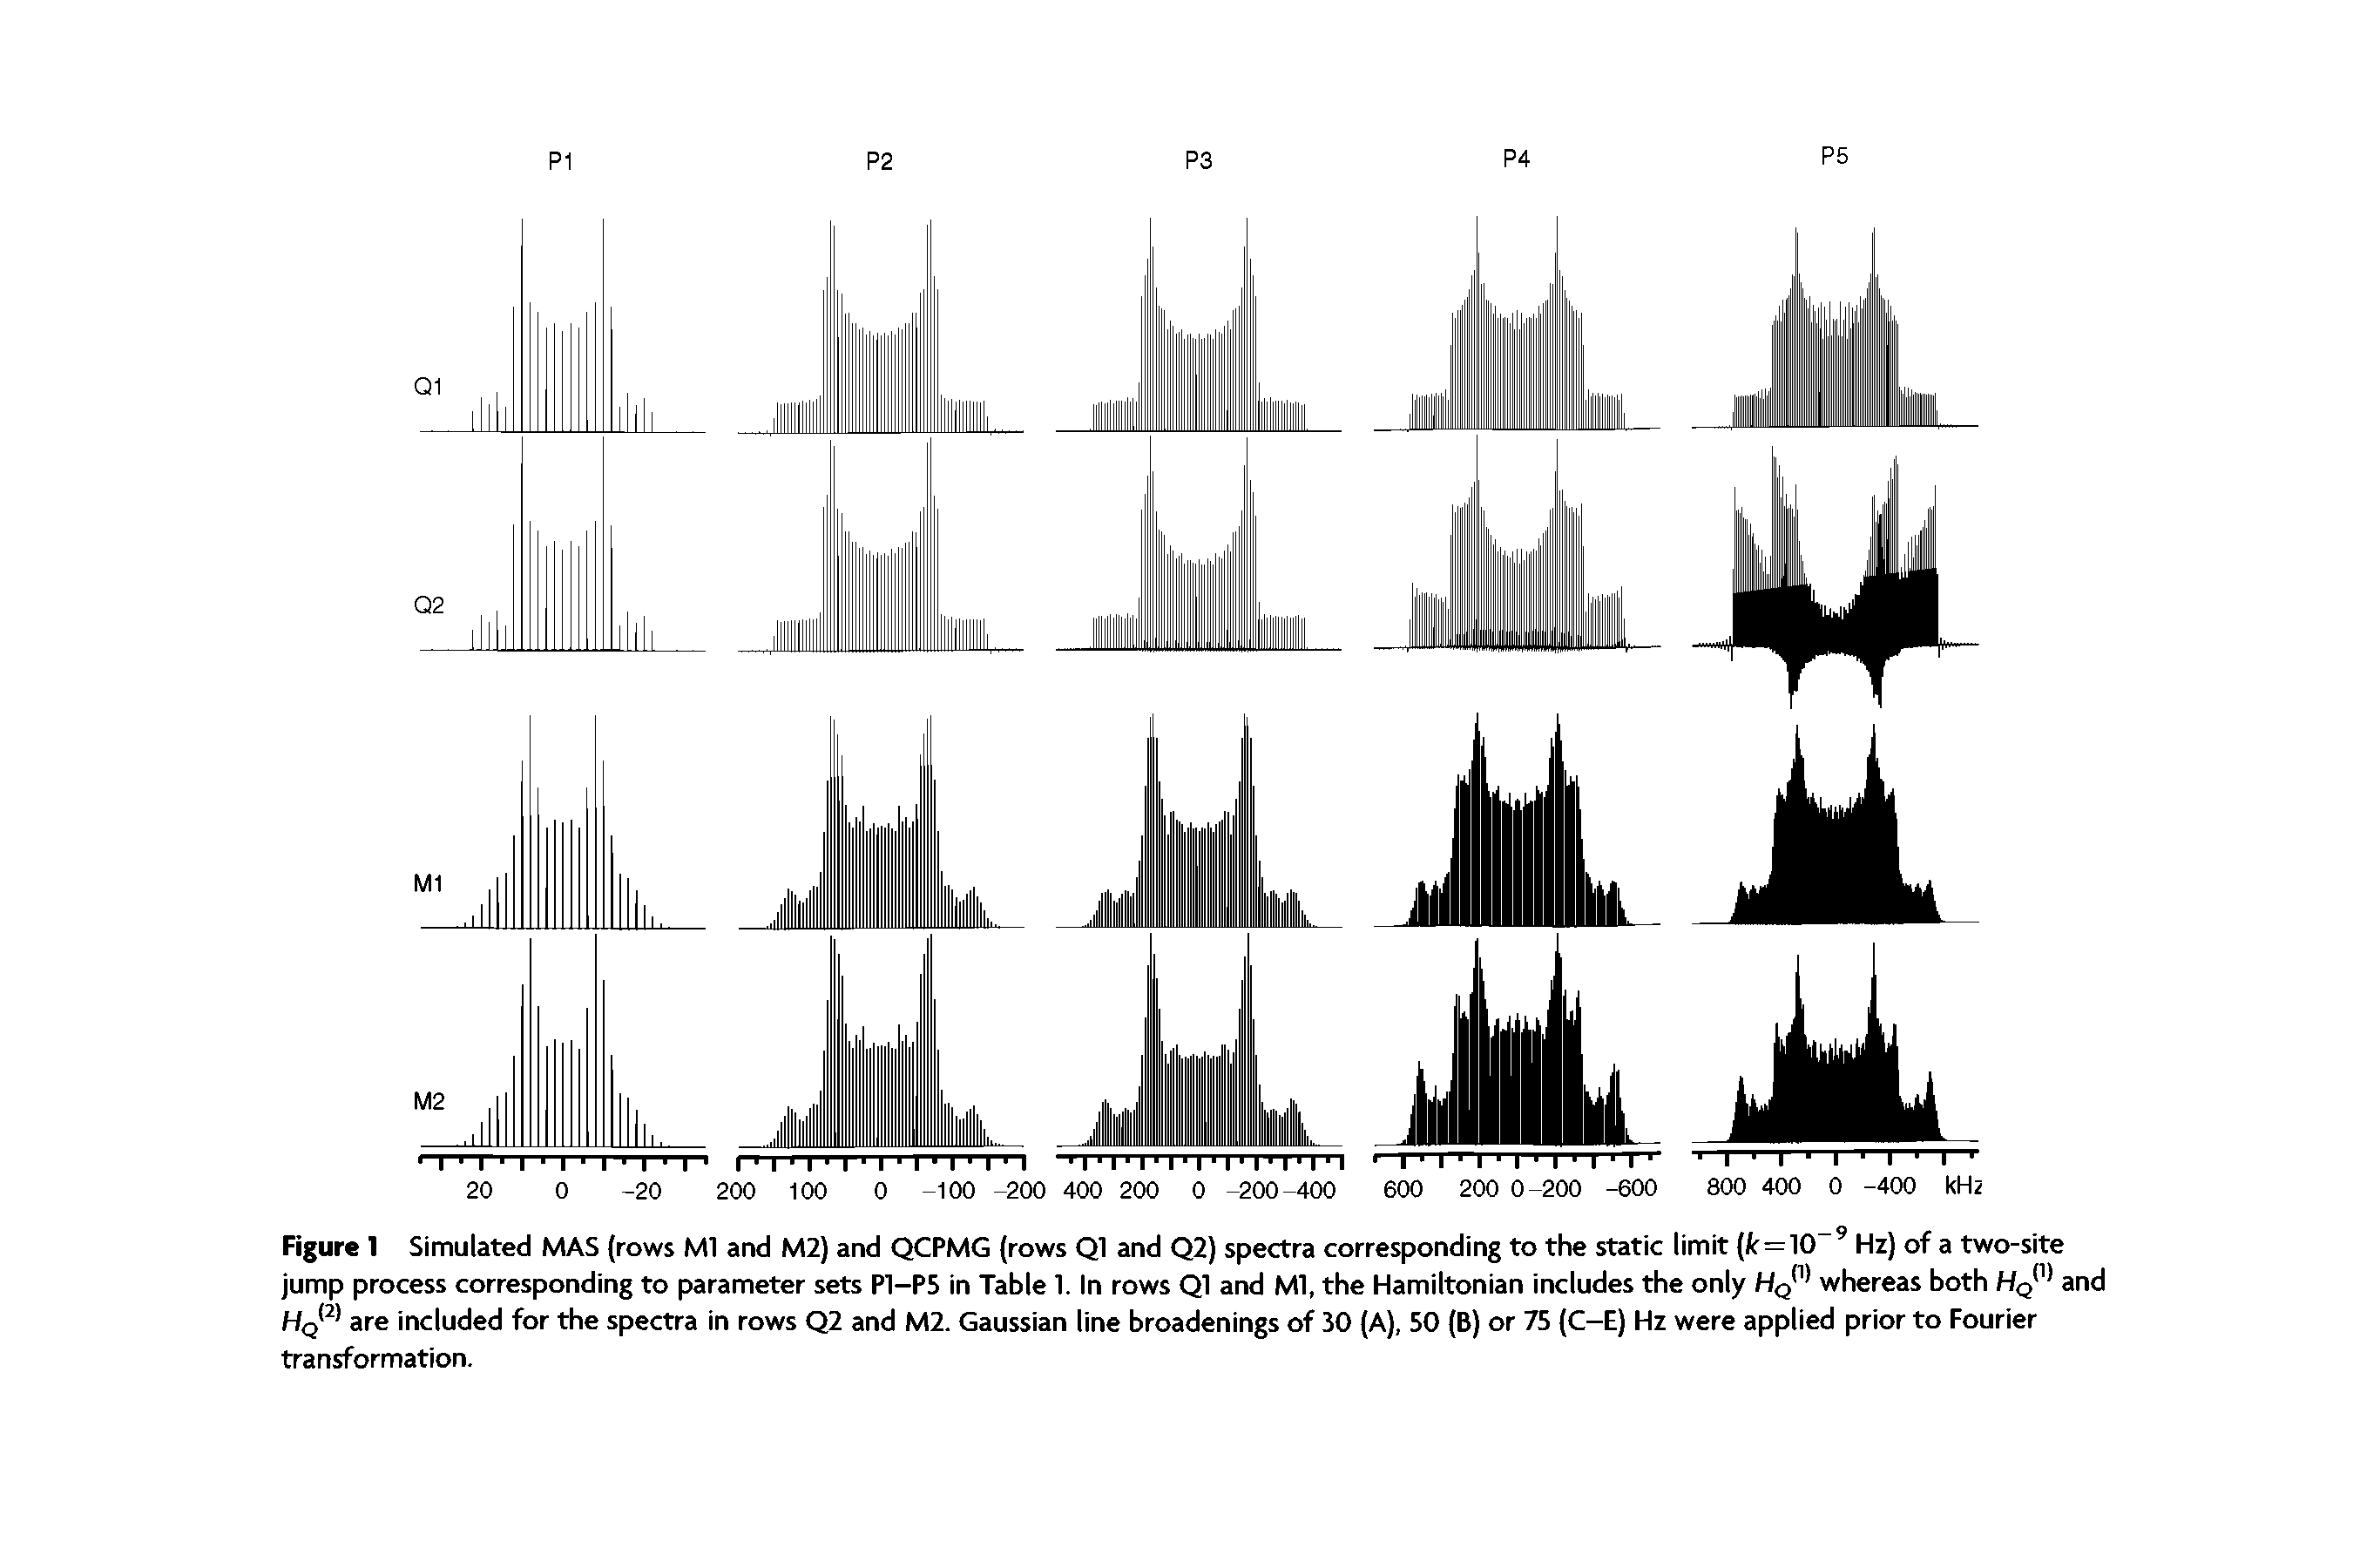 Figure 1 Simulated MAS (rows Ml and M2) and QCPMG (rows Q1 and Q2) spectra corresponding to the static limit (fc=10-9 Hz) of a two-site jump process corresponding to parameter sets P1-P5 in Table 1. In rows Q1 and Ml, the Hamiltonian includes the only HQ(1) whereas both HQ(1) and Hq(2) are included for the spectra in rows Q2 and M2. Gaussian line broadenings of 30 (A), 50 (B) or 75 (C-E) Hz were applied prior to Fourier transformation.